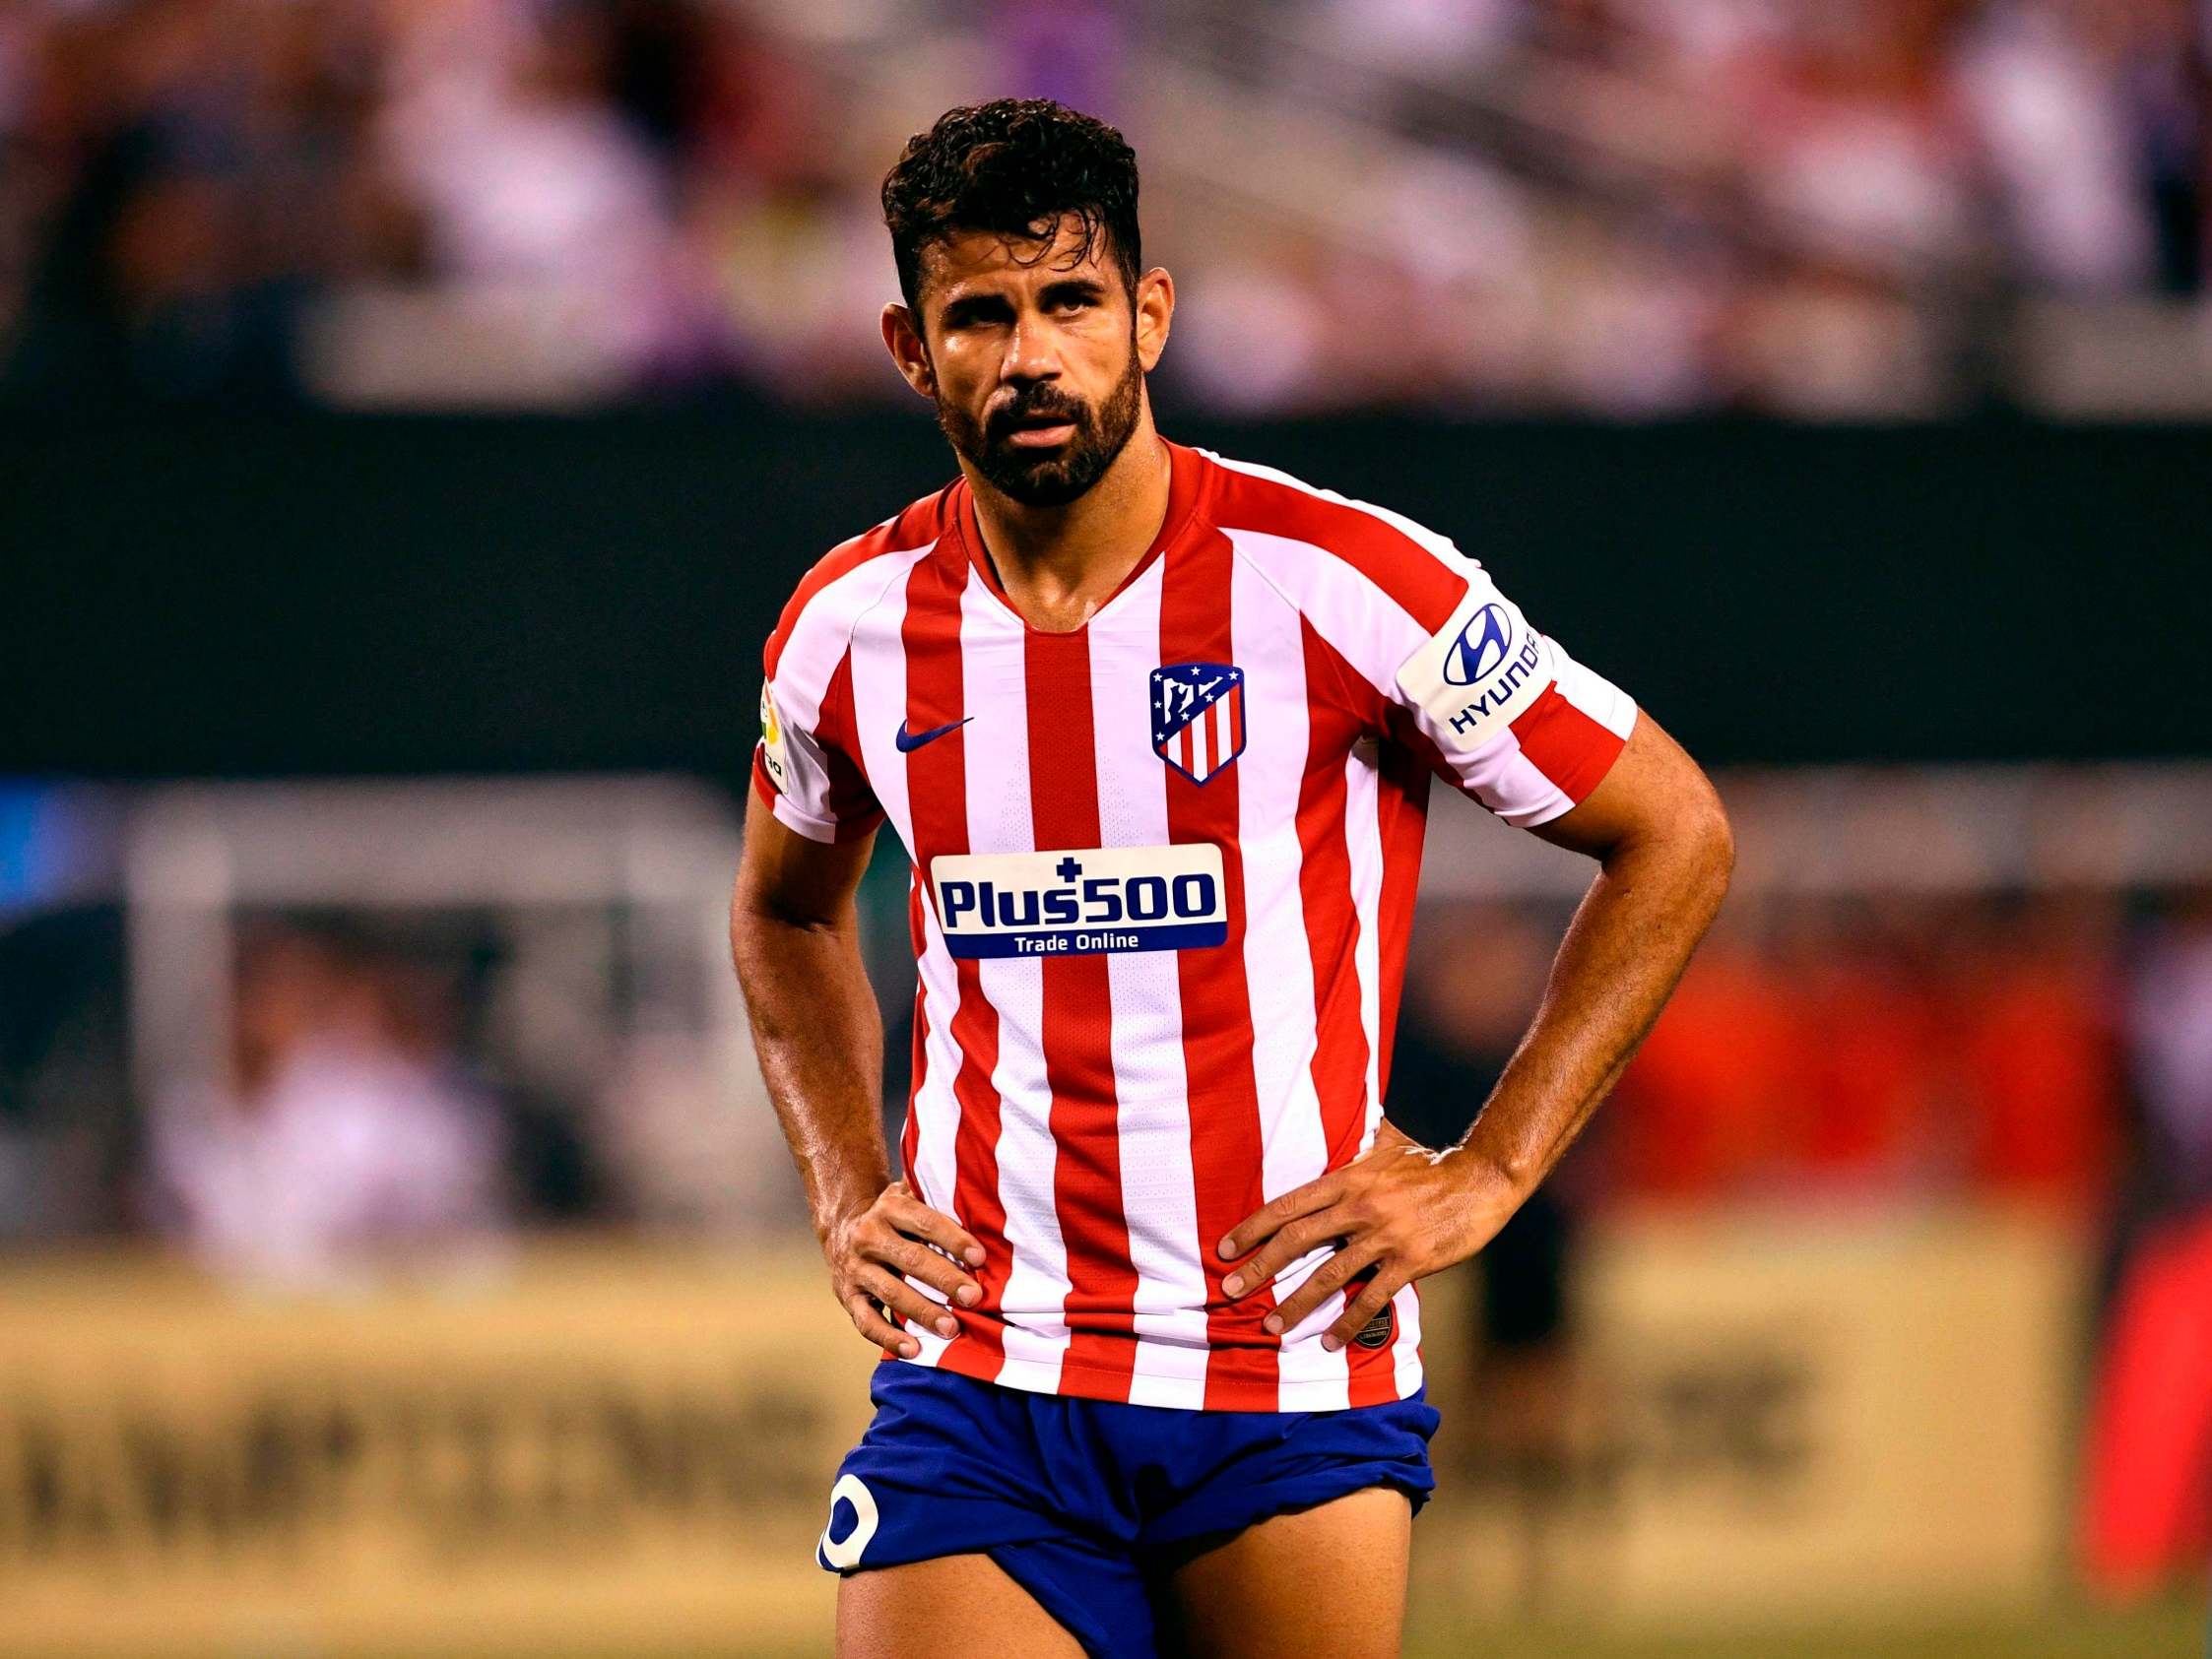 Diego Costa ended the pre-season friendly by getting sent off